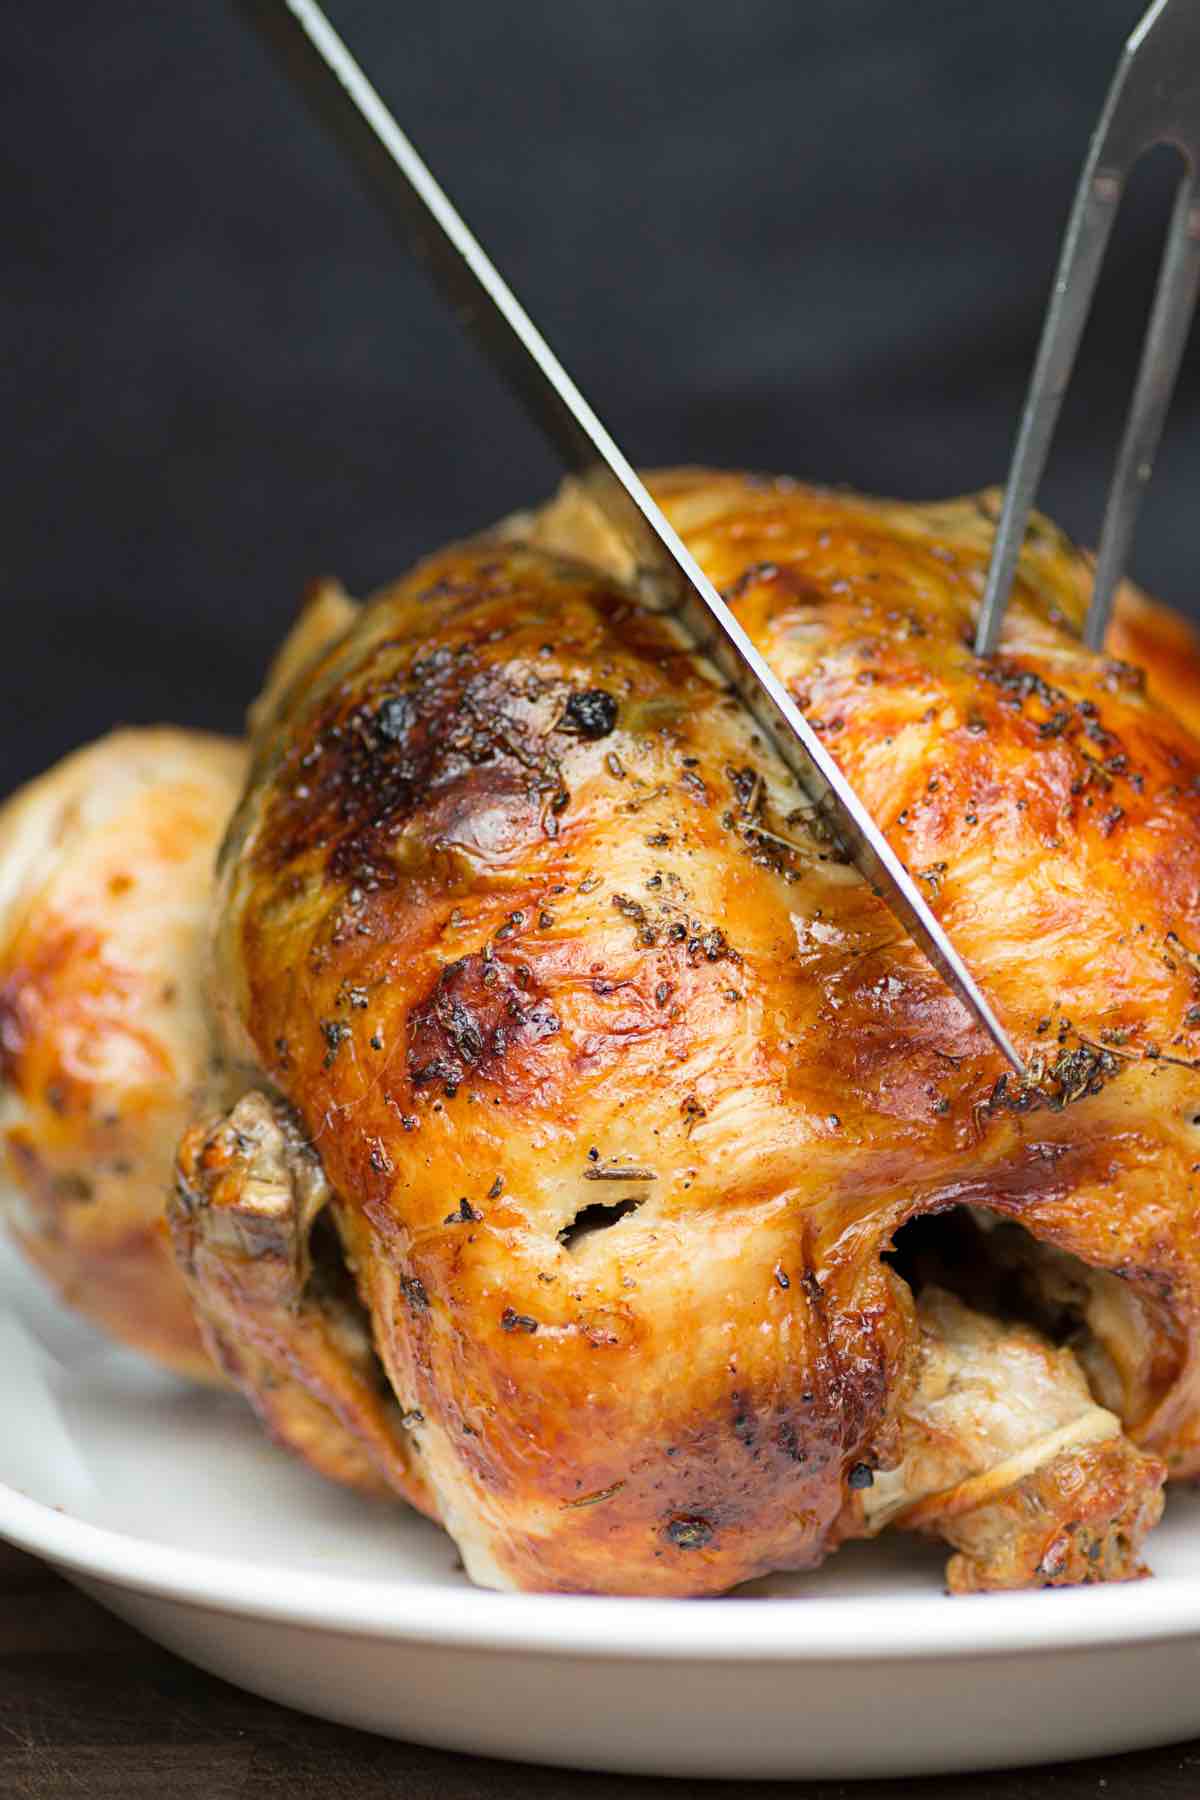 Rotisserie chicken is usually sold whole, so you’re likely to have leftovers. The rest of the chicken can easily be incorporated into your meals throughout the next few days, making it super useful for weekly meal prepping. In this post you’ll learn the best way to Reheat Rotisserie Chicken so it’s flavorful and juicy with every meal.